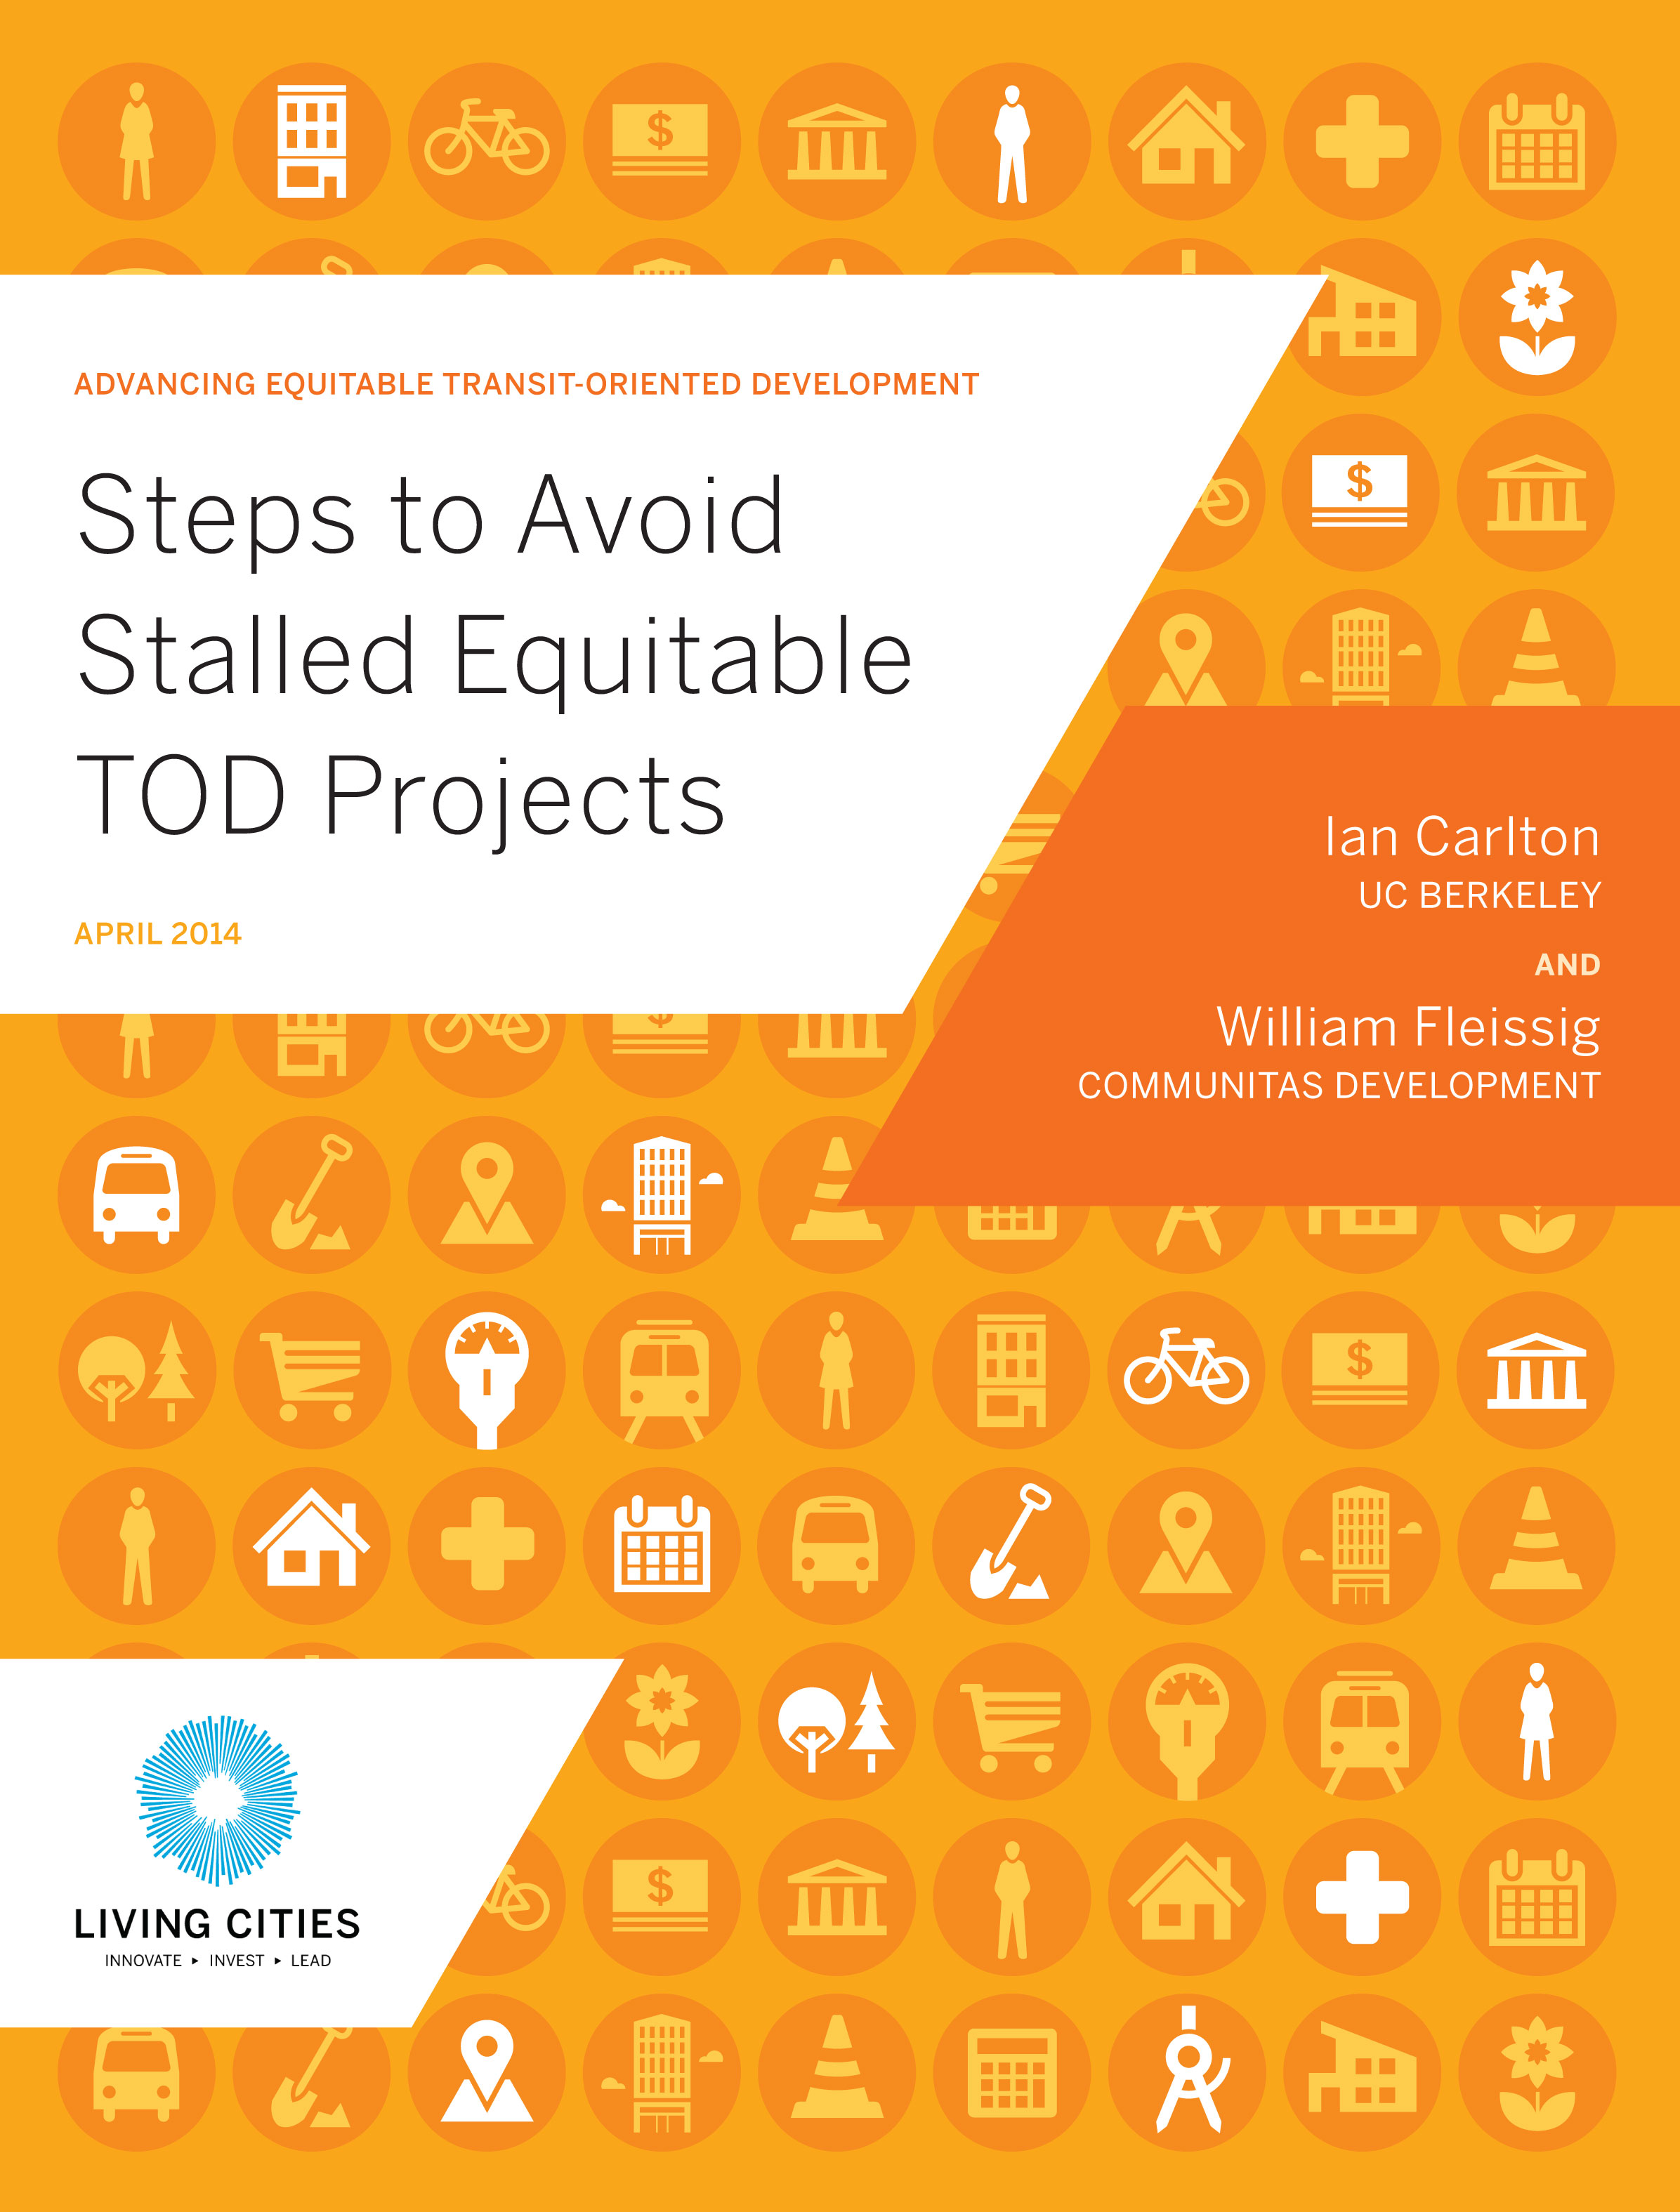 Steps to Avoid Stalled Equitable TOD Projects